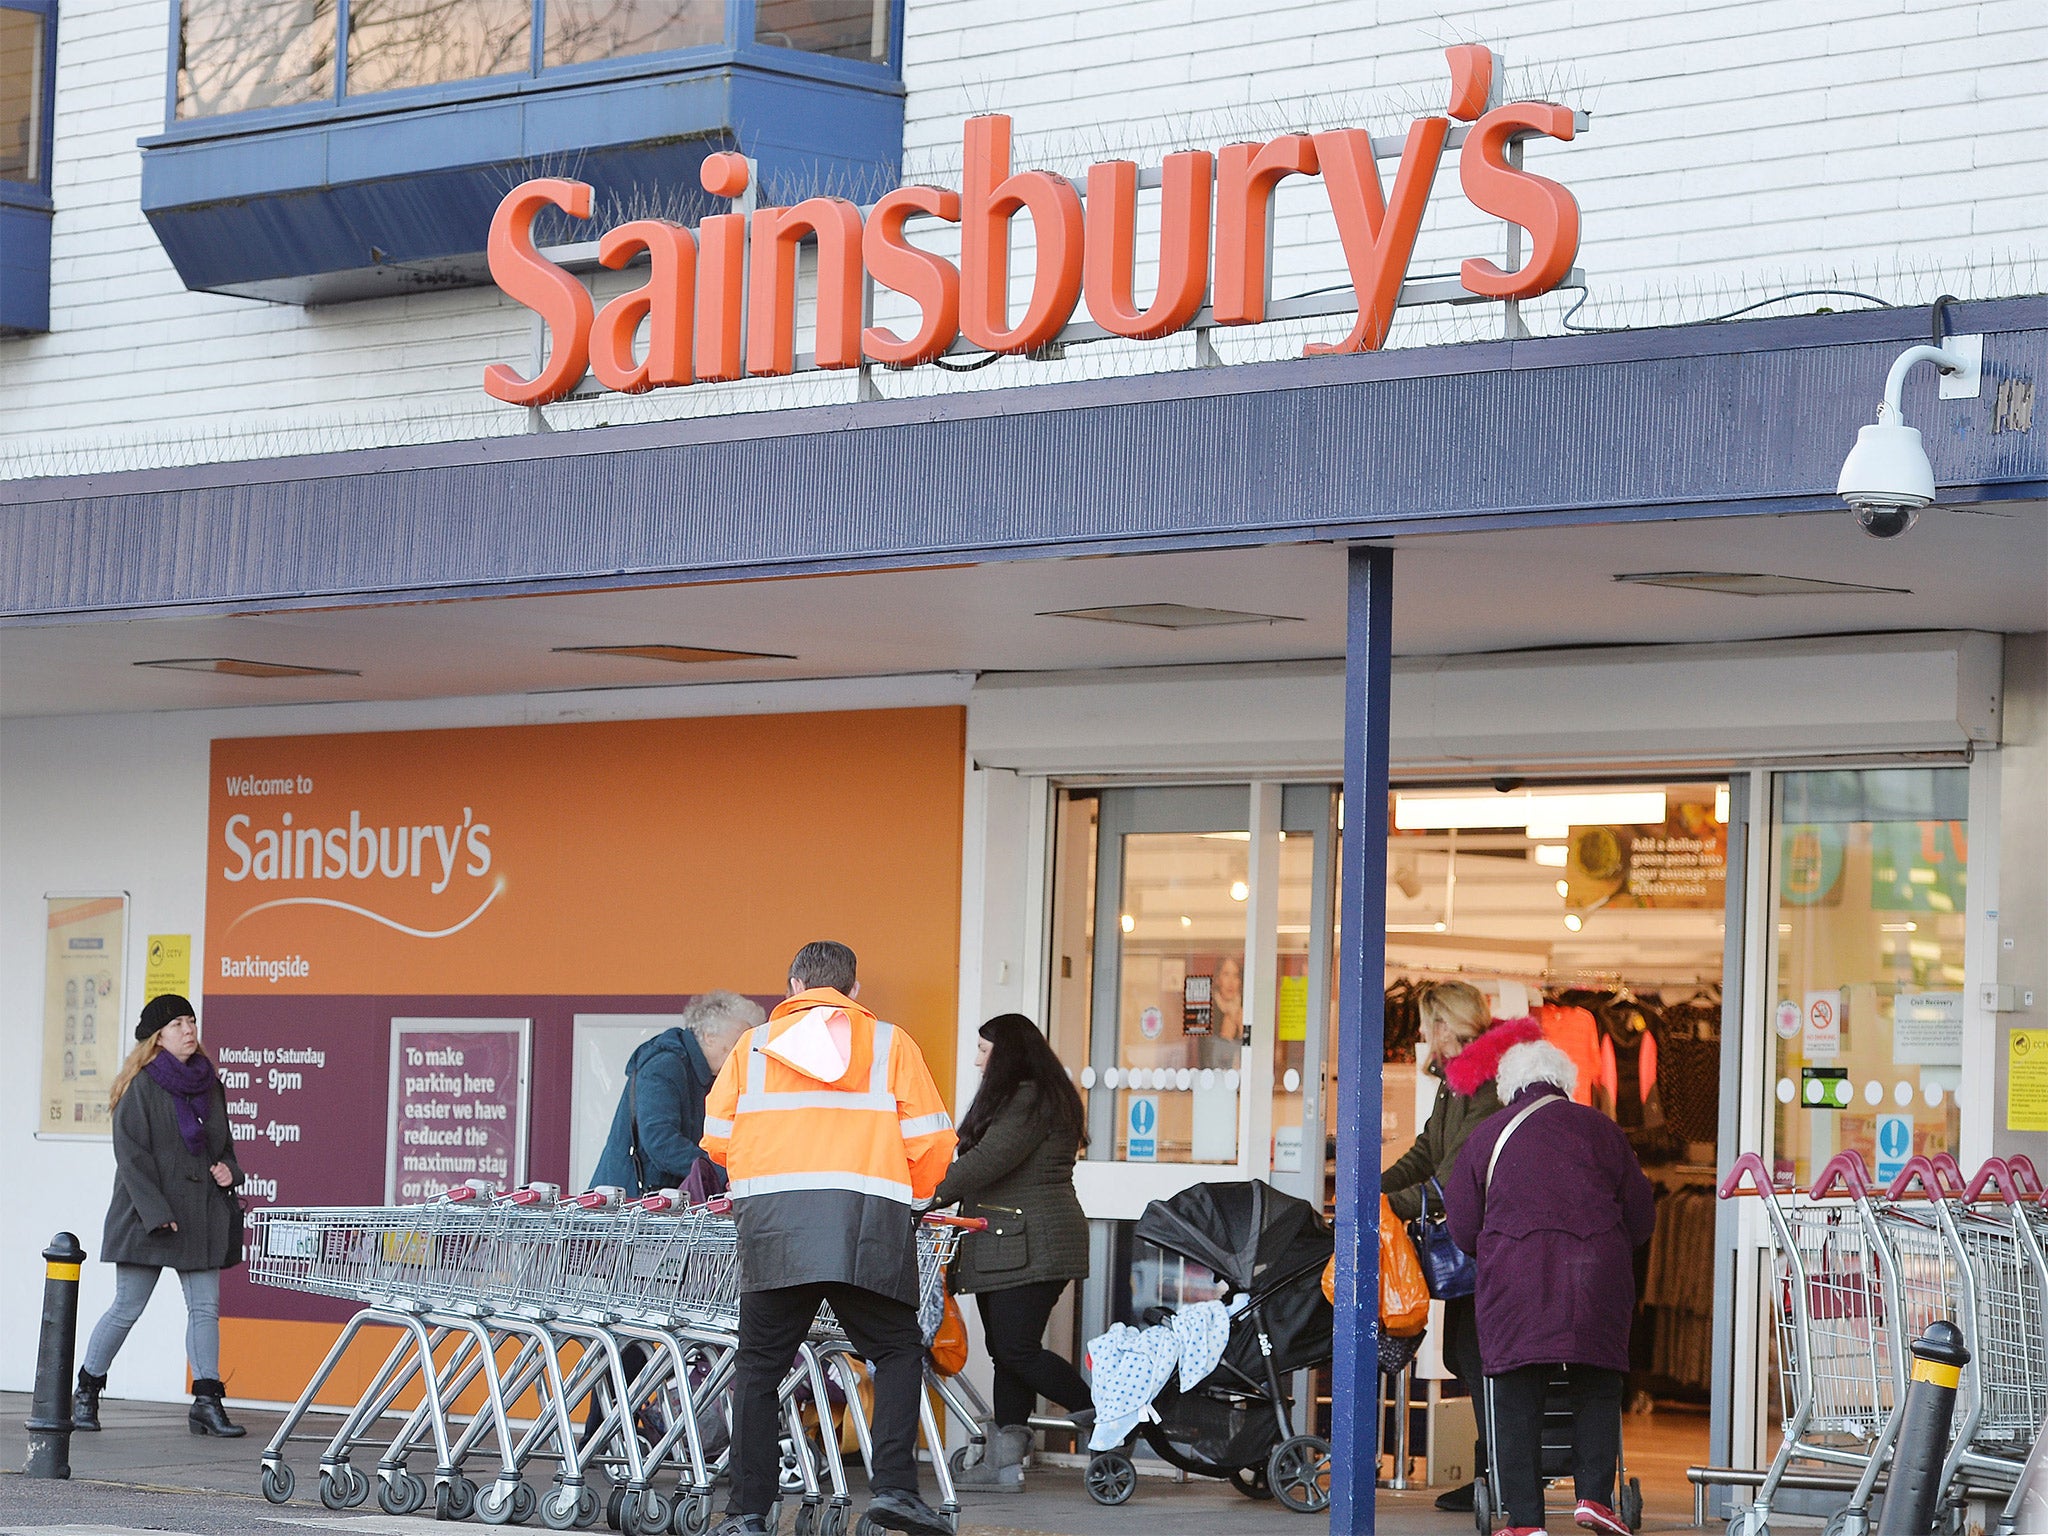 Sainsbury's sales are falling